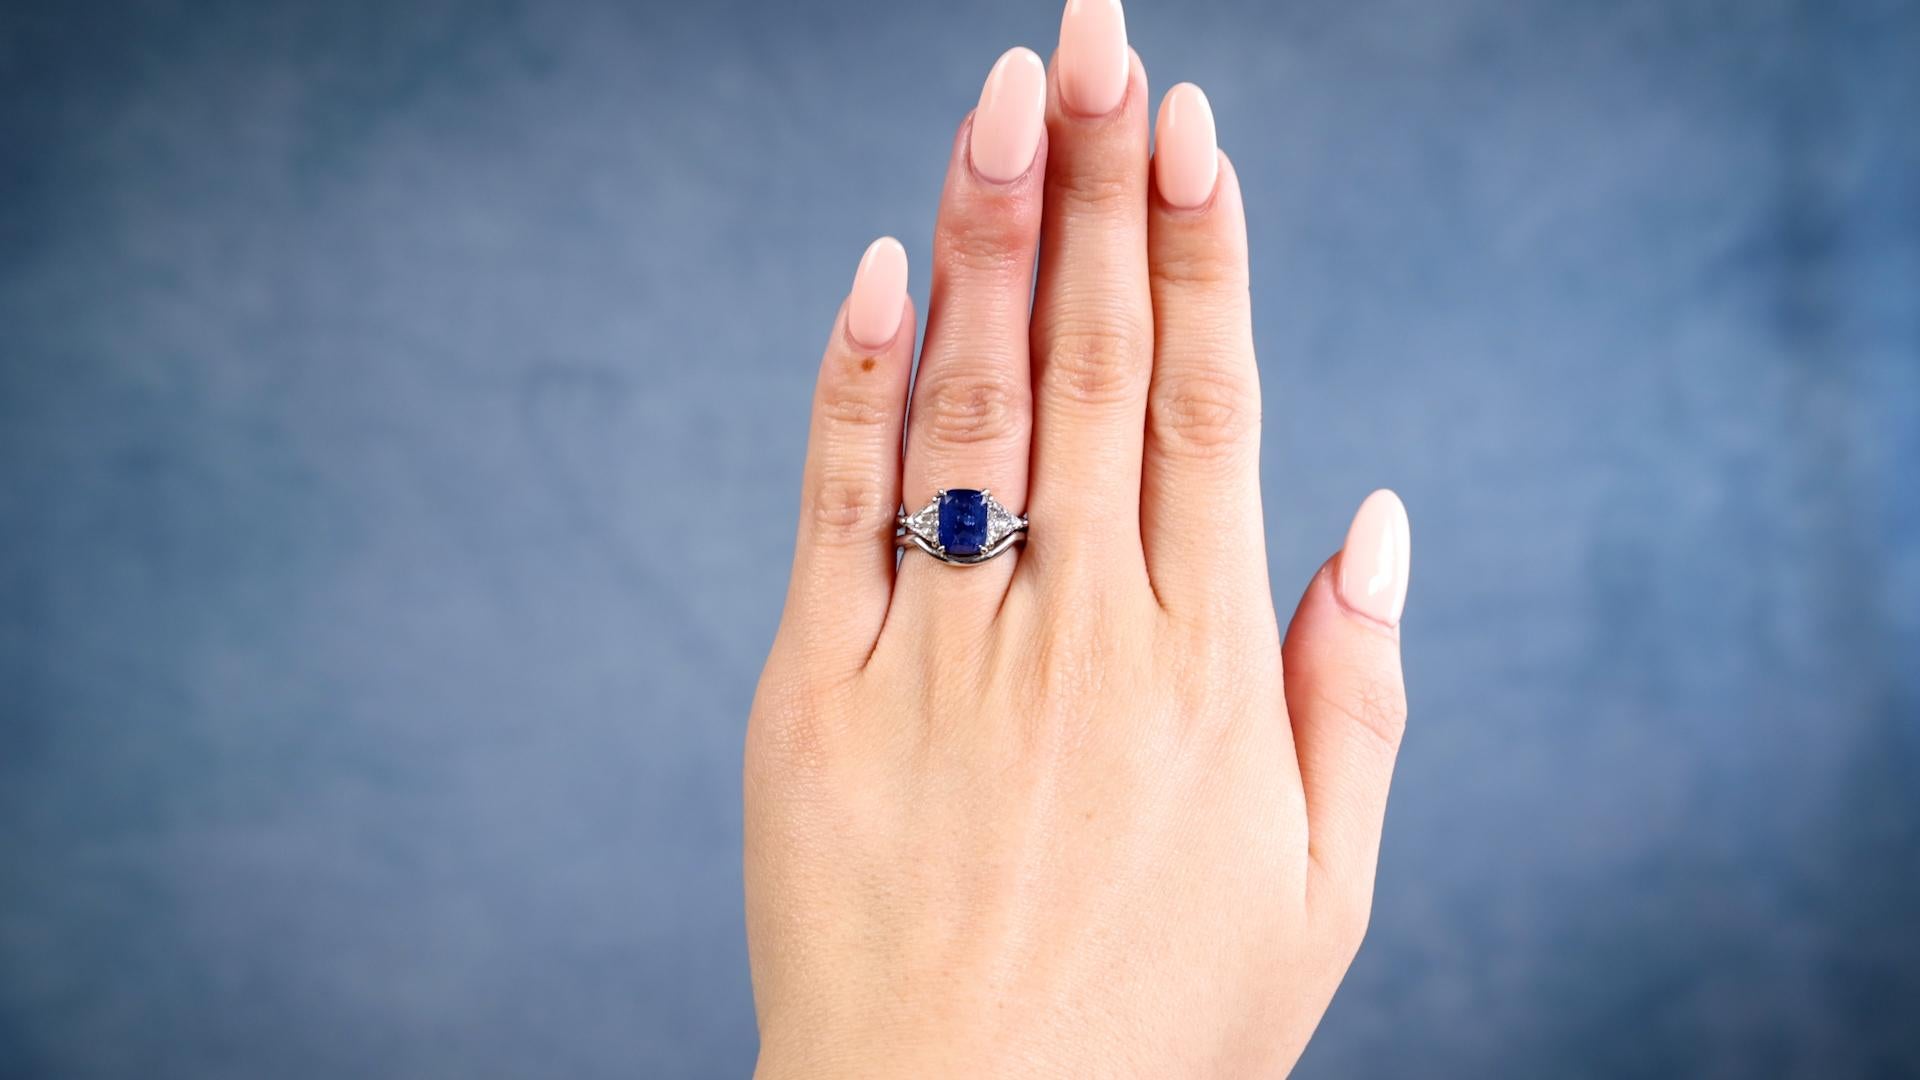 One Vintage GIA 2.66 Carat Ceylon Sapphire Diamond Platinum Ring Set. Featuring one GIA cushion mixed cut sapphire of 2.66 carats, accompanied by GIA #1236197739 stating the sapphire is of Ceylon (Sri Lanka) origin. Accented by two triangular